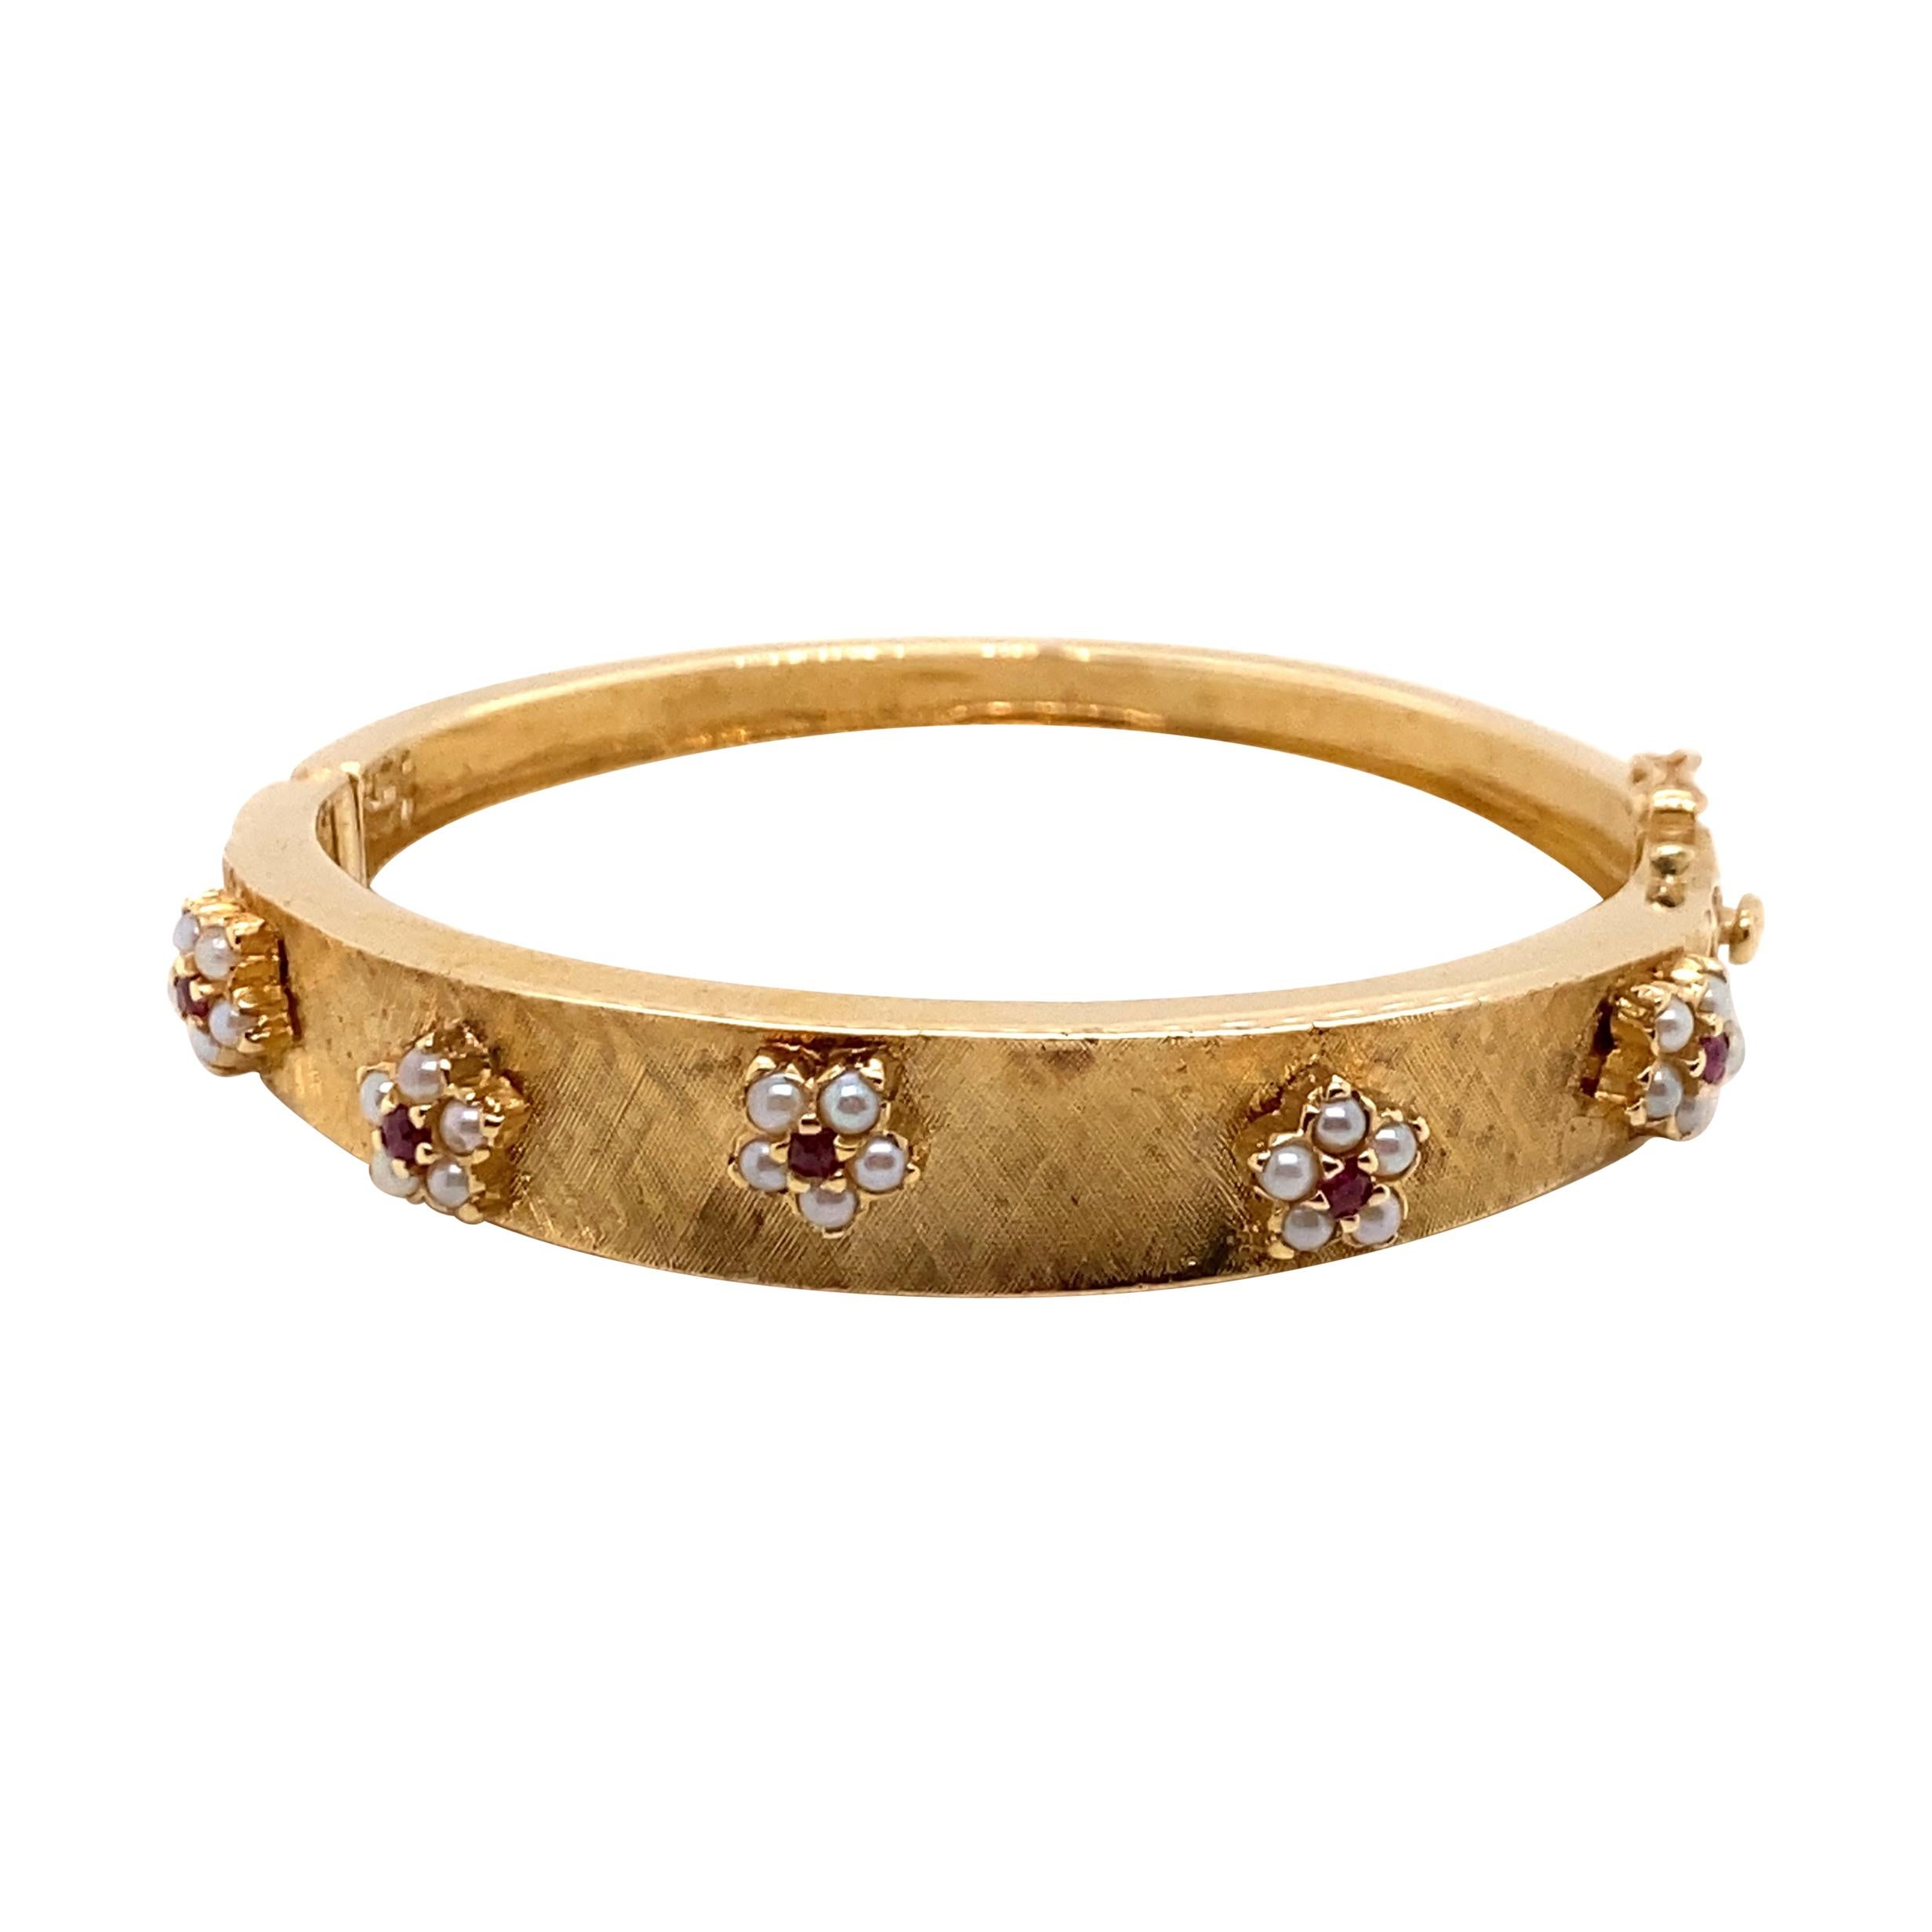 Vintage 14k Yellow Gold Bangle Bracelet with Ruby and Pearl Flowers